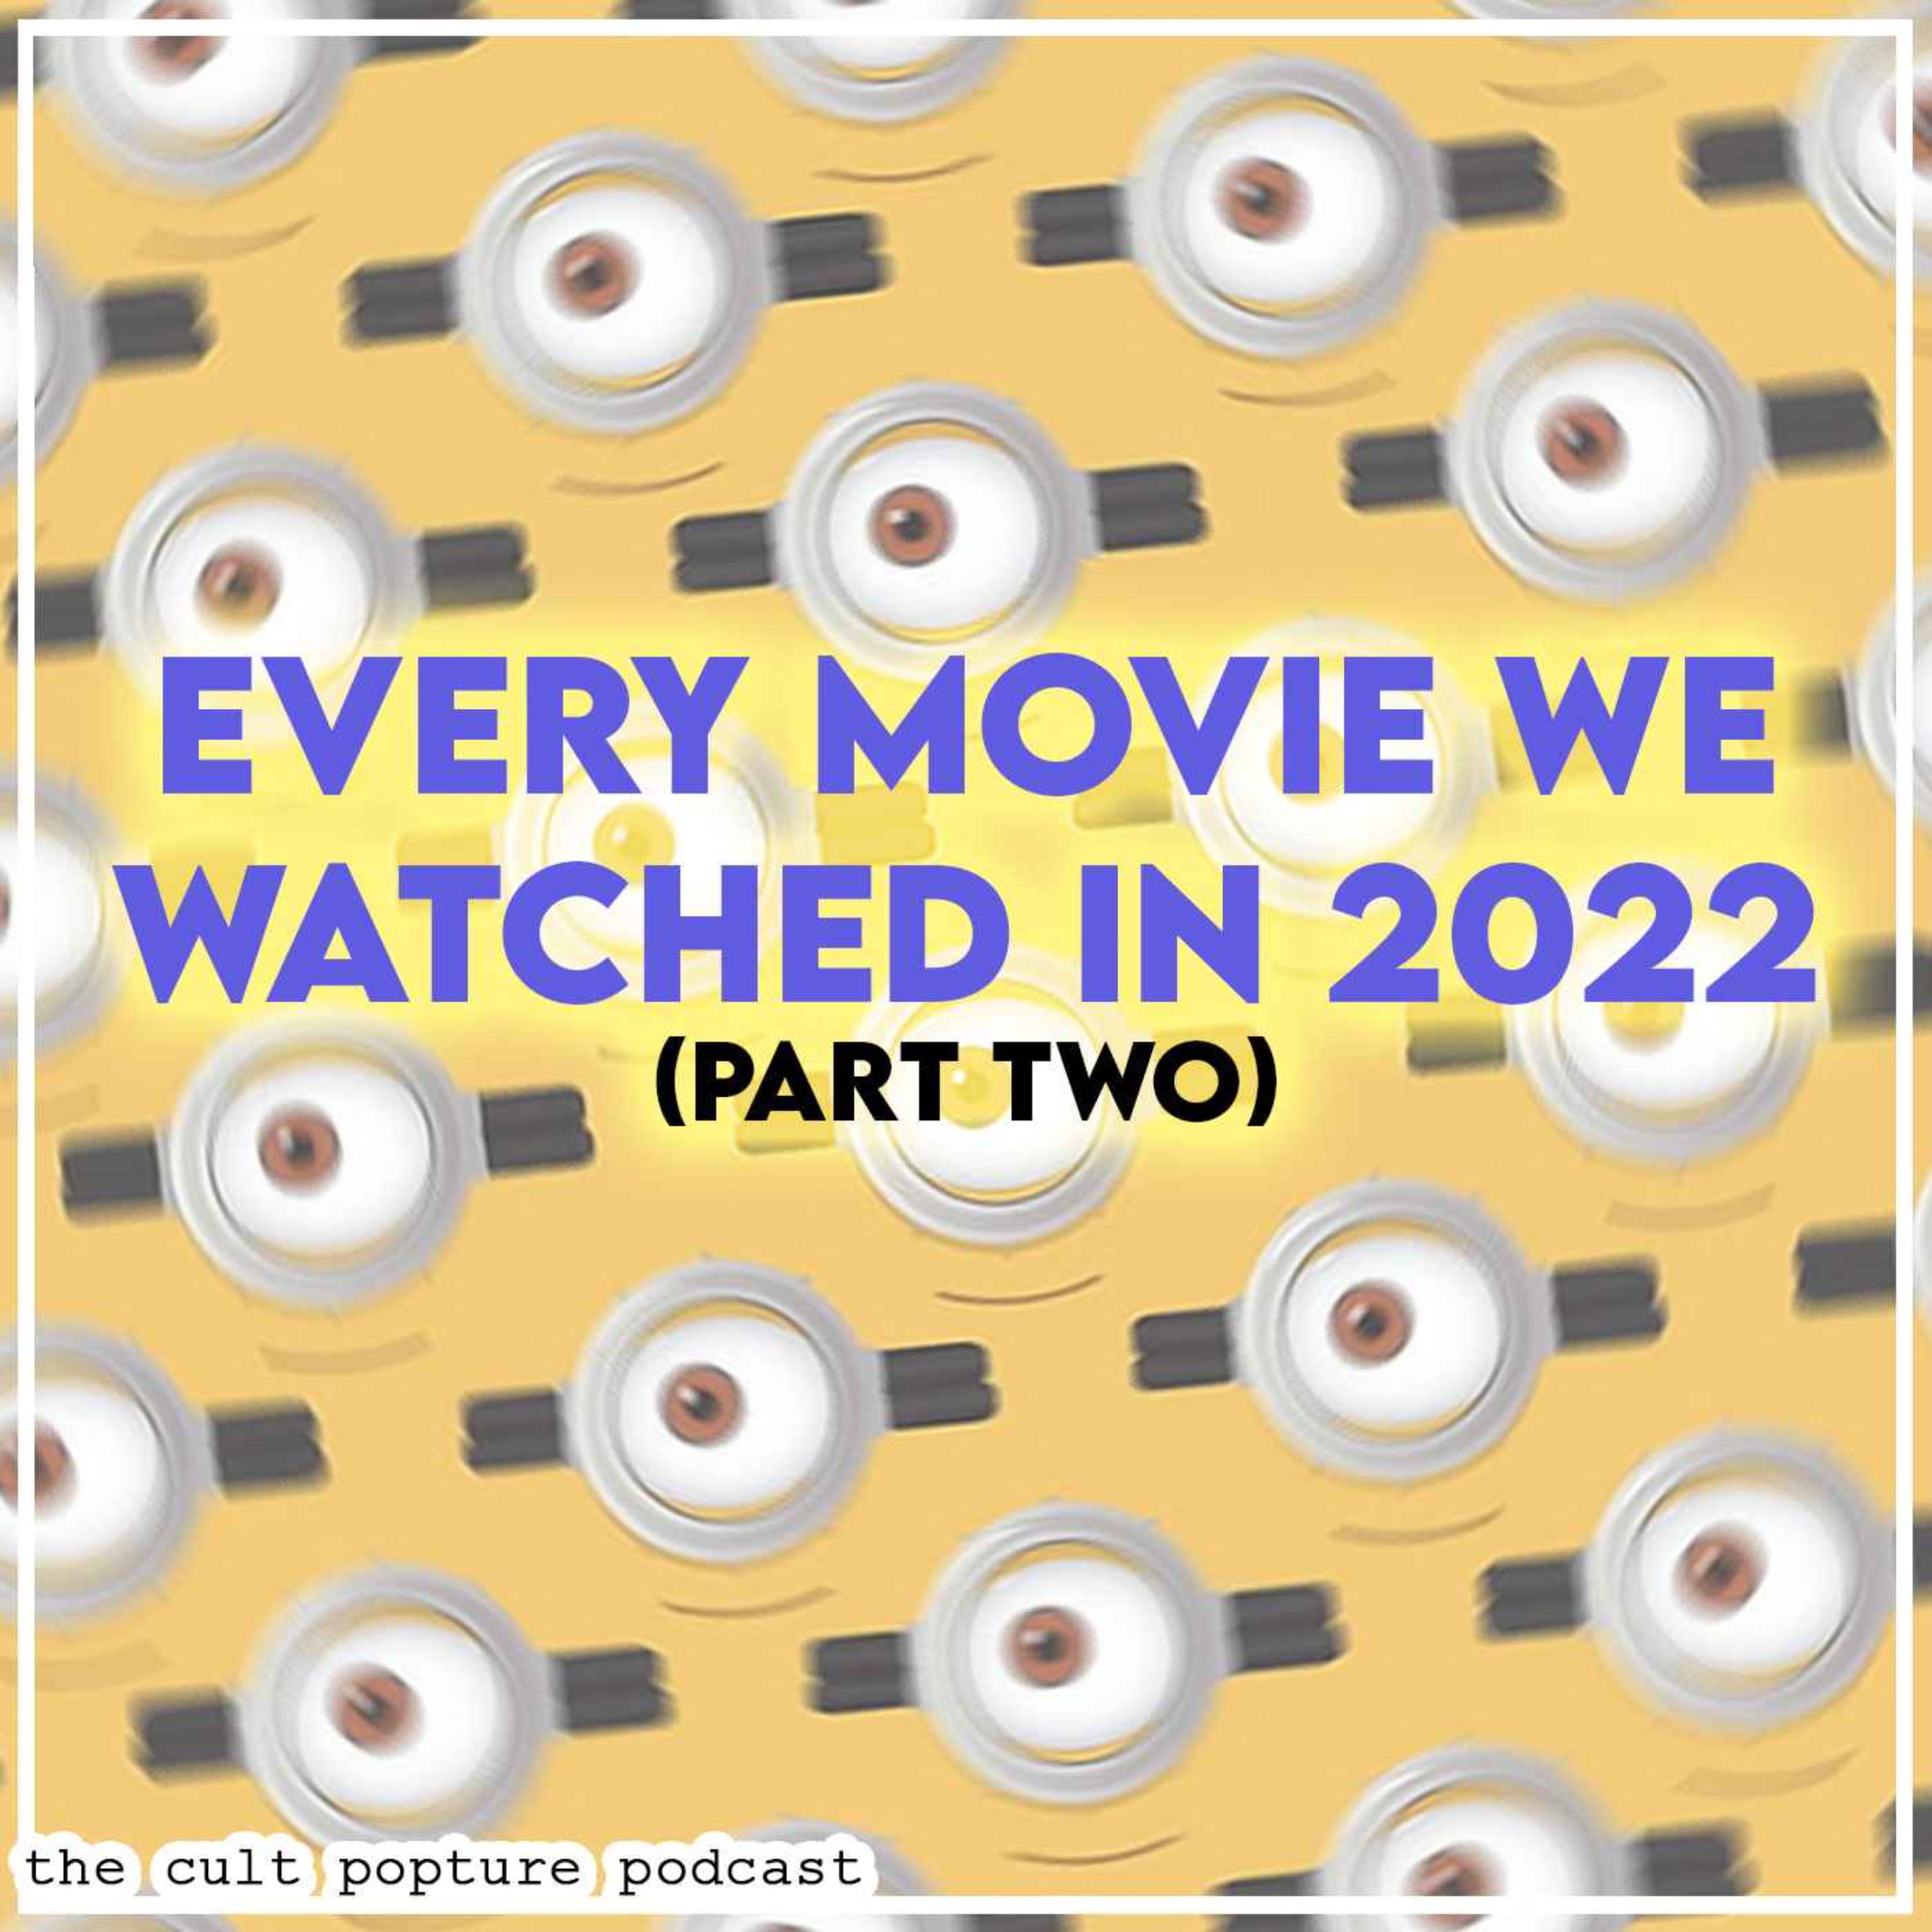 Every Movie We Watched in 2022 (Part Two) | The Cult Popture Podcast